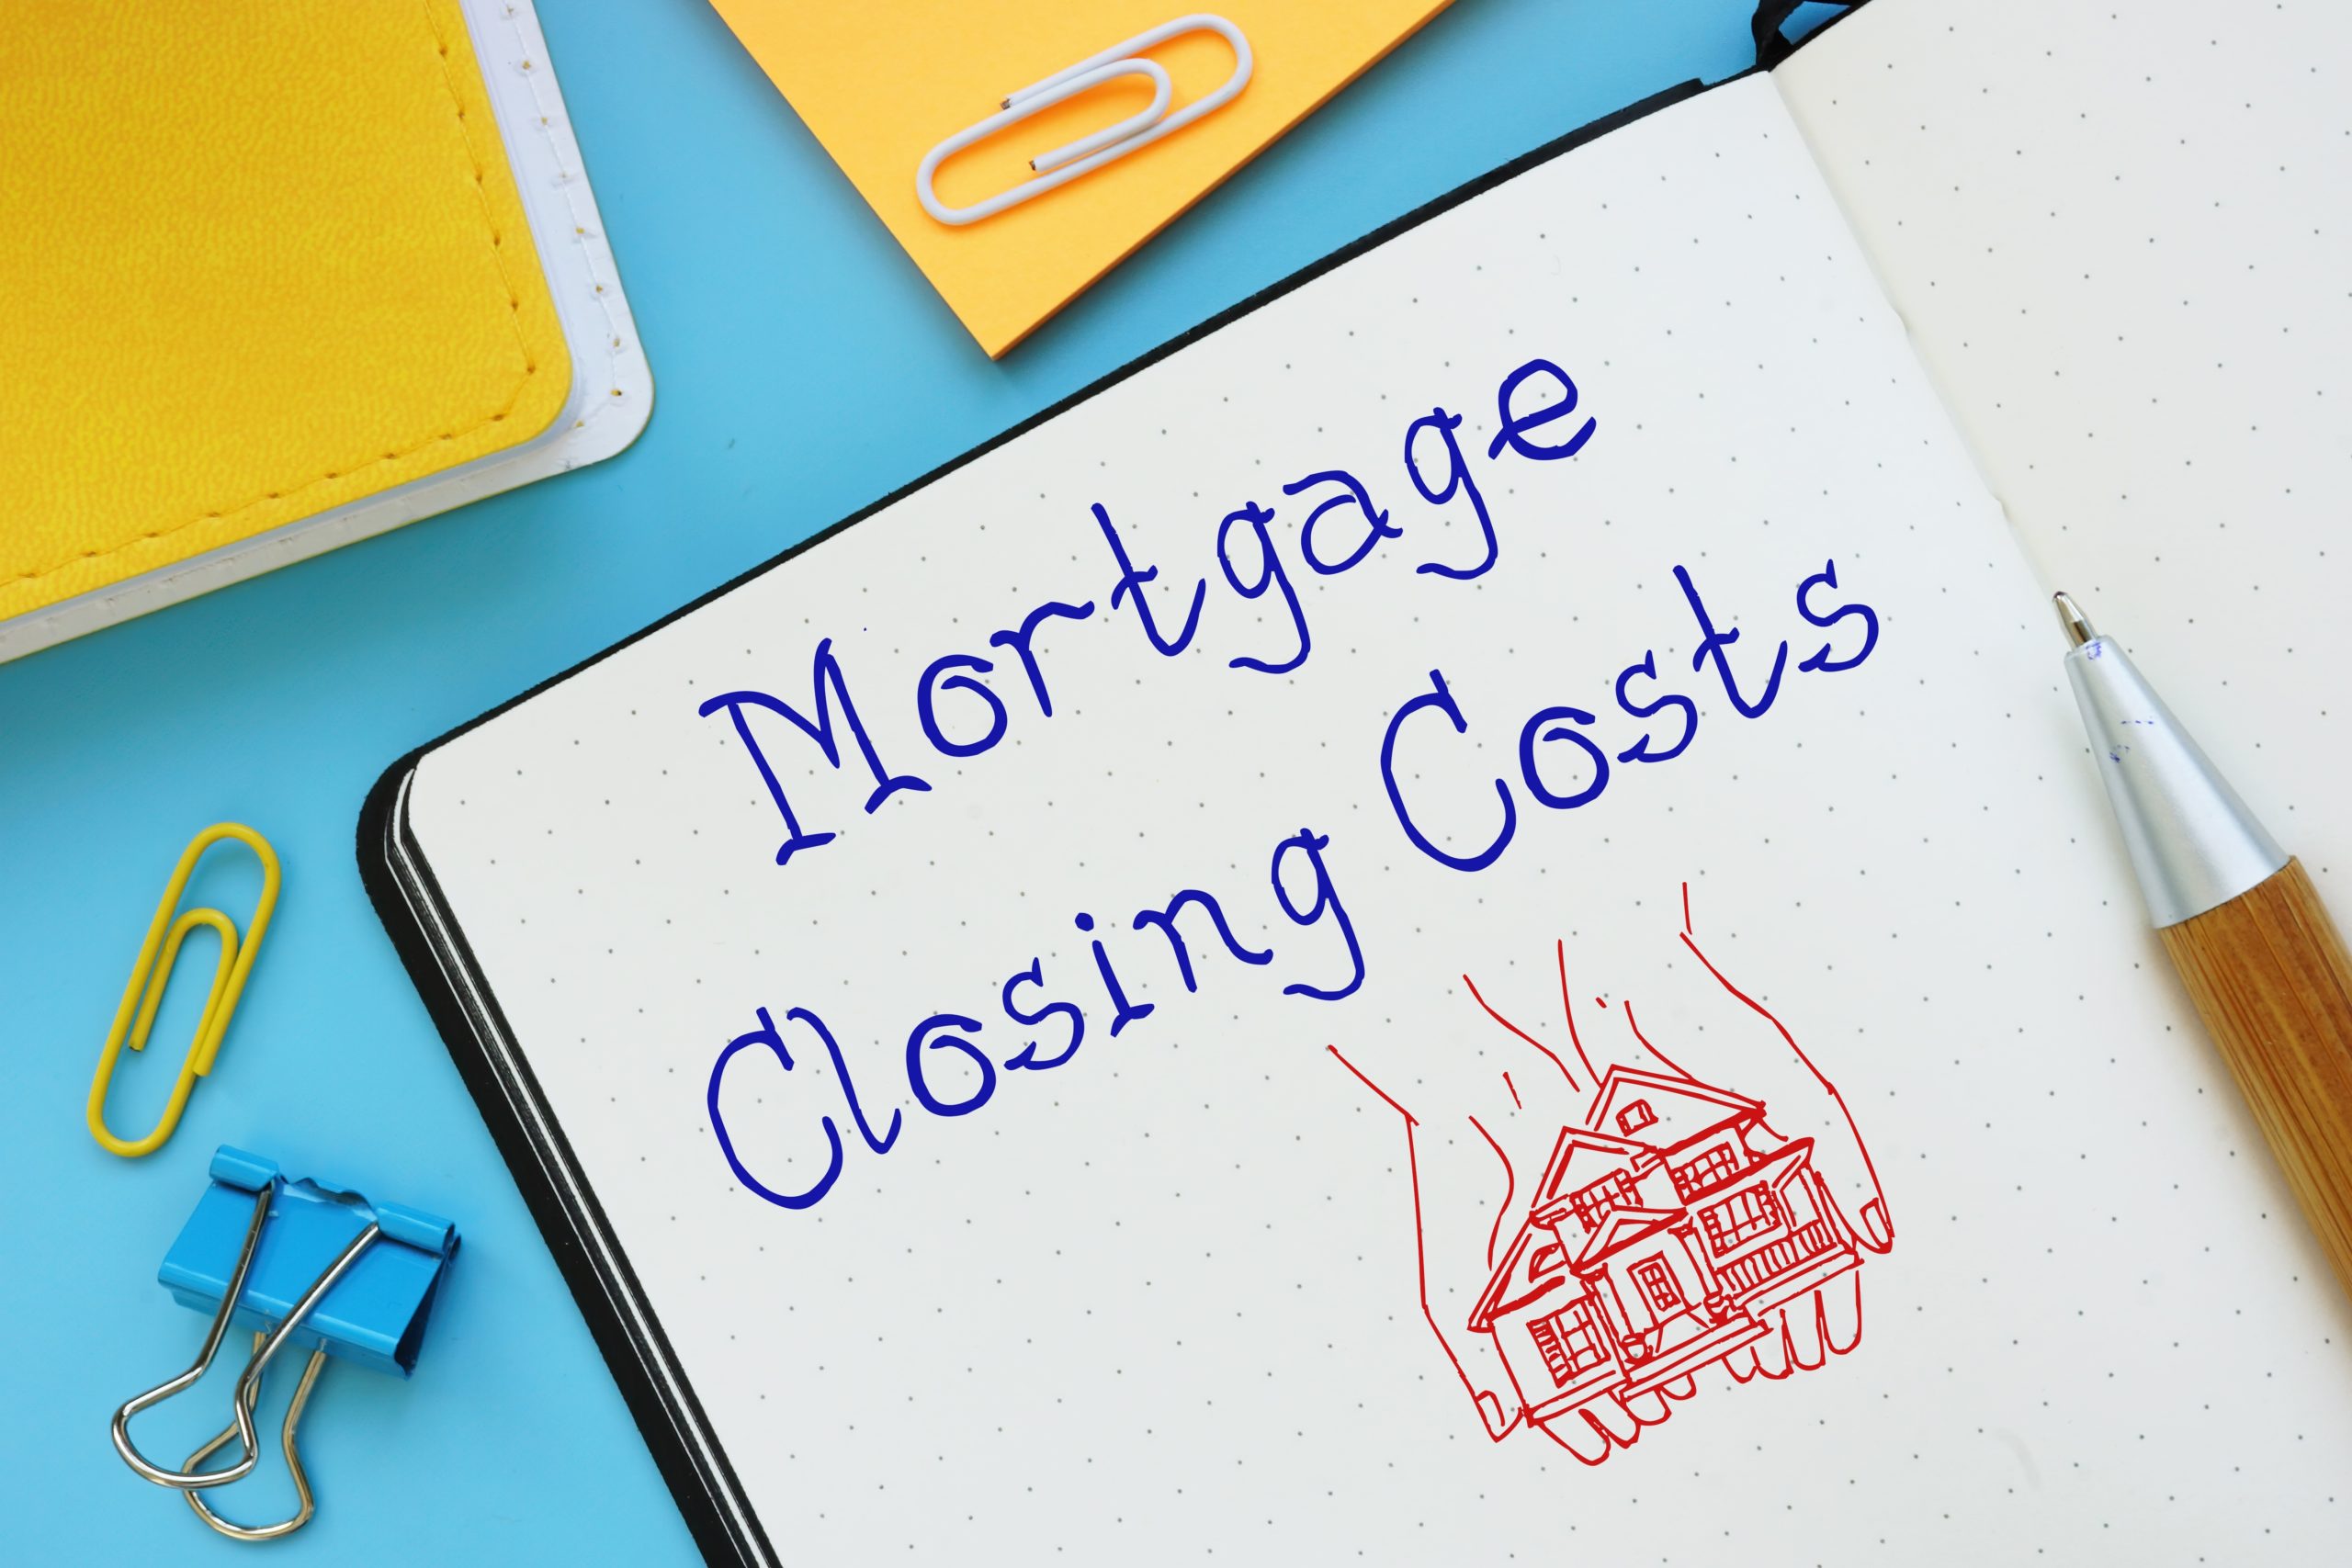 Business concept meaning Mortgage Closing Costs with phrase on the piece of paper.